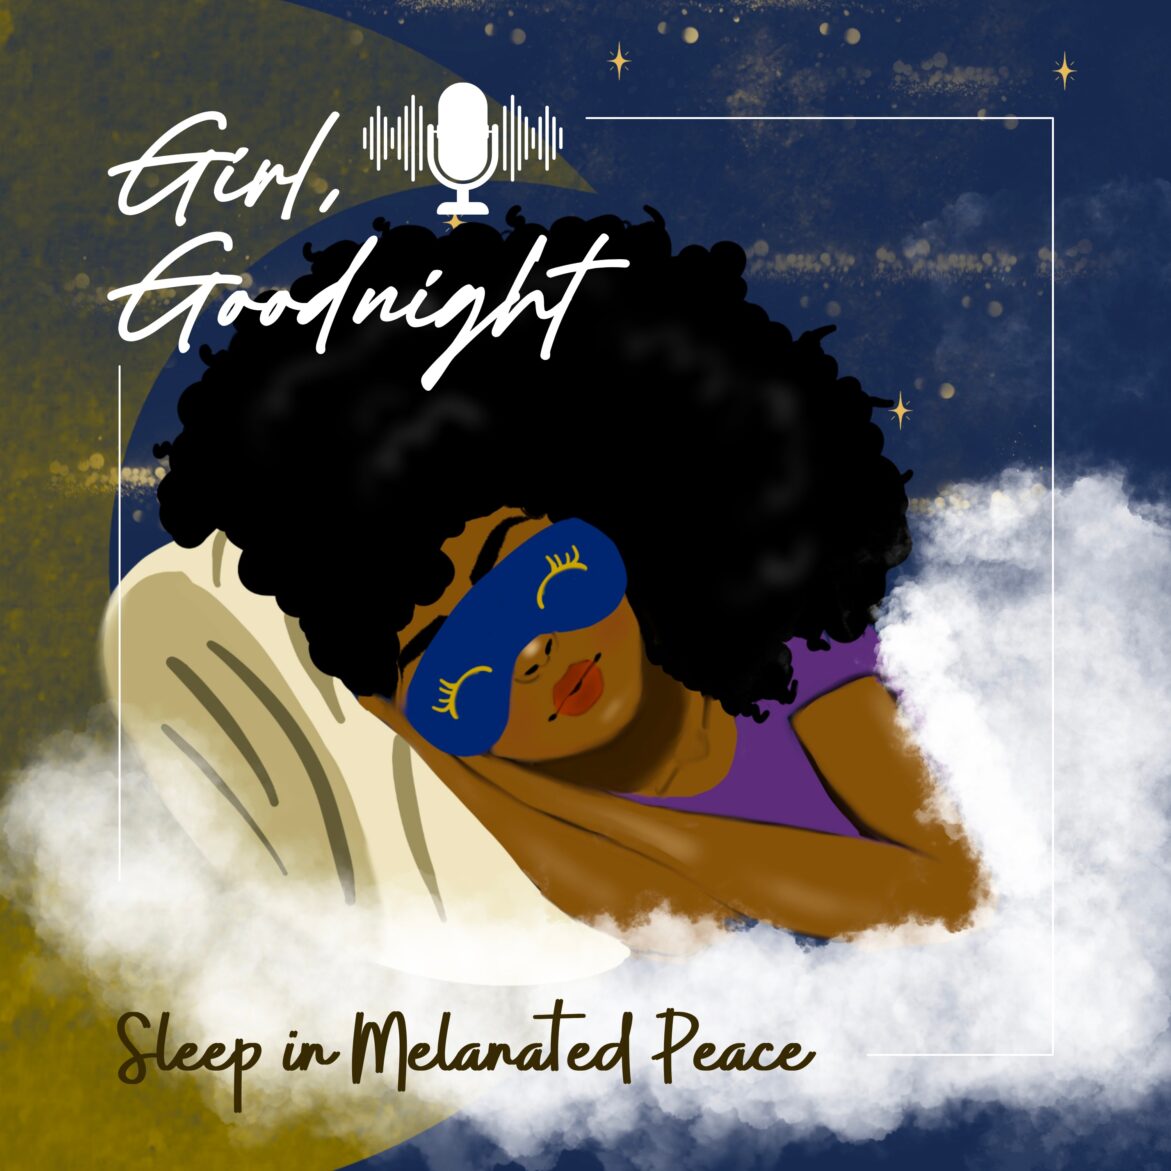 Black Podcasting - The Girl, Goodnight Cap- This is Healing pt 2